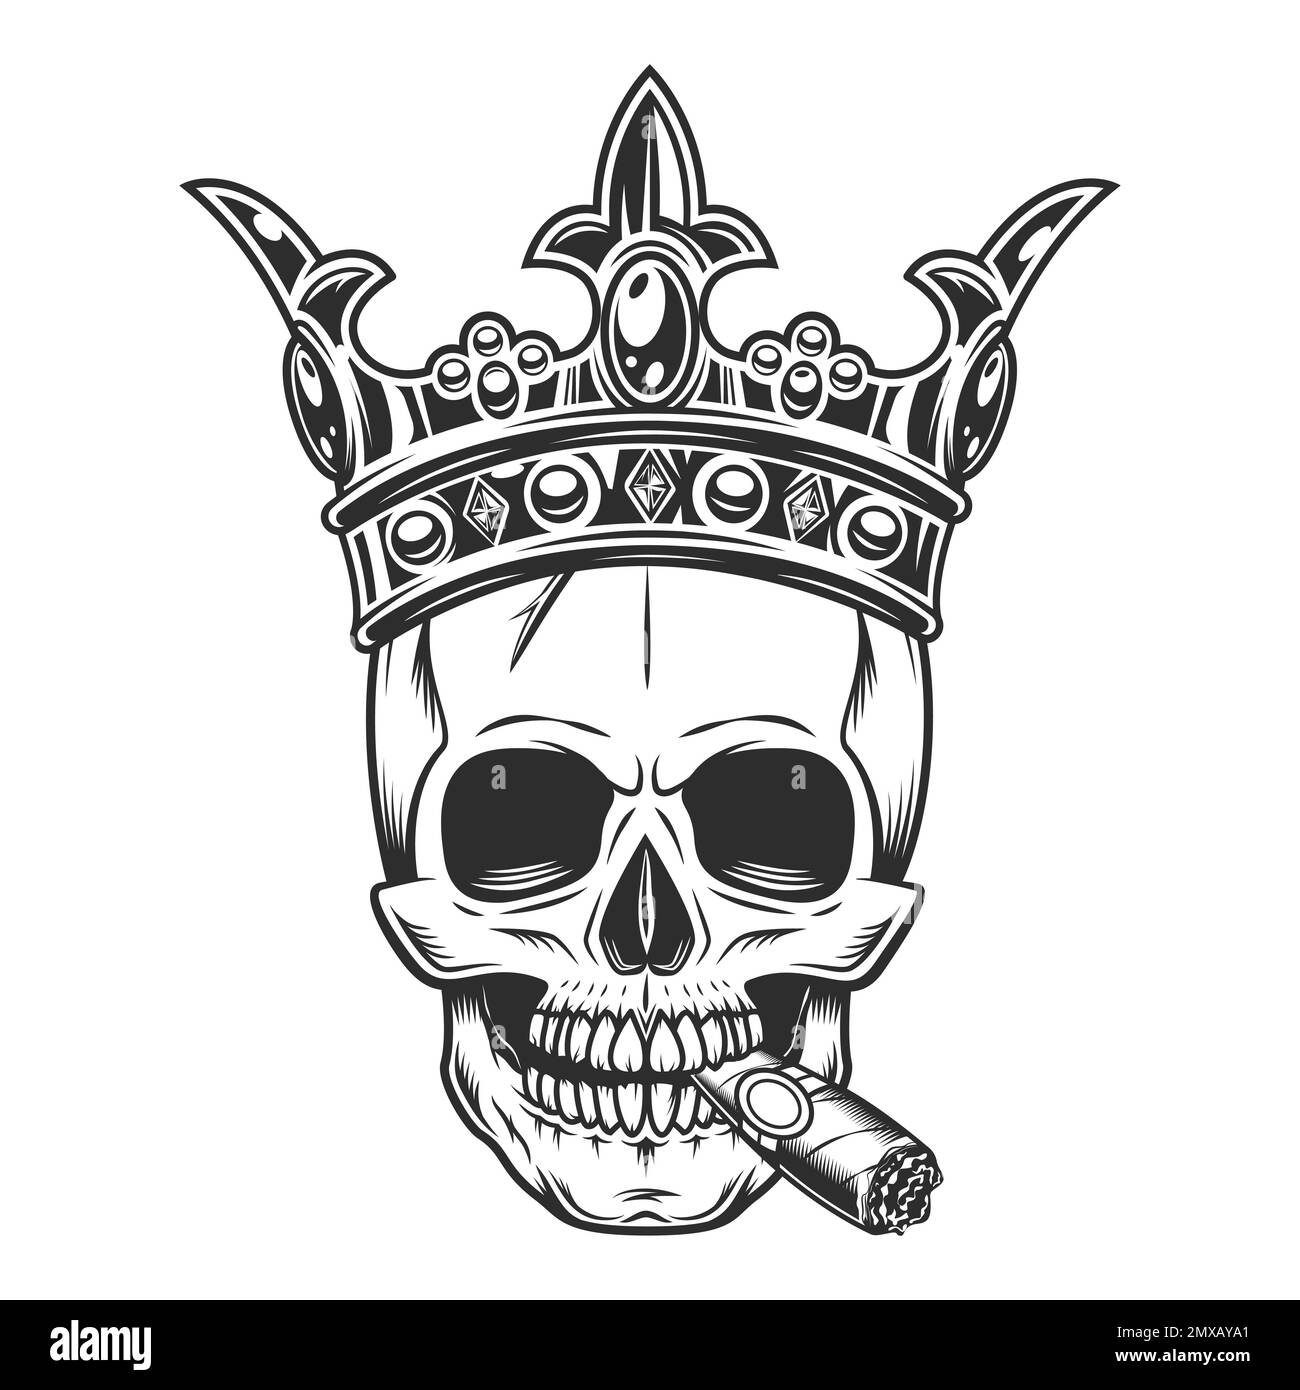 Skull smoking cigar or cigarette smoke in crown king monochrome illustration isolated on white background. Vintage crowning, elegant queen or king Stock Photo